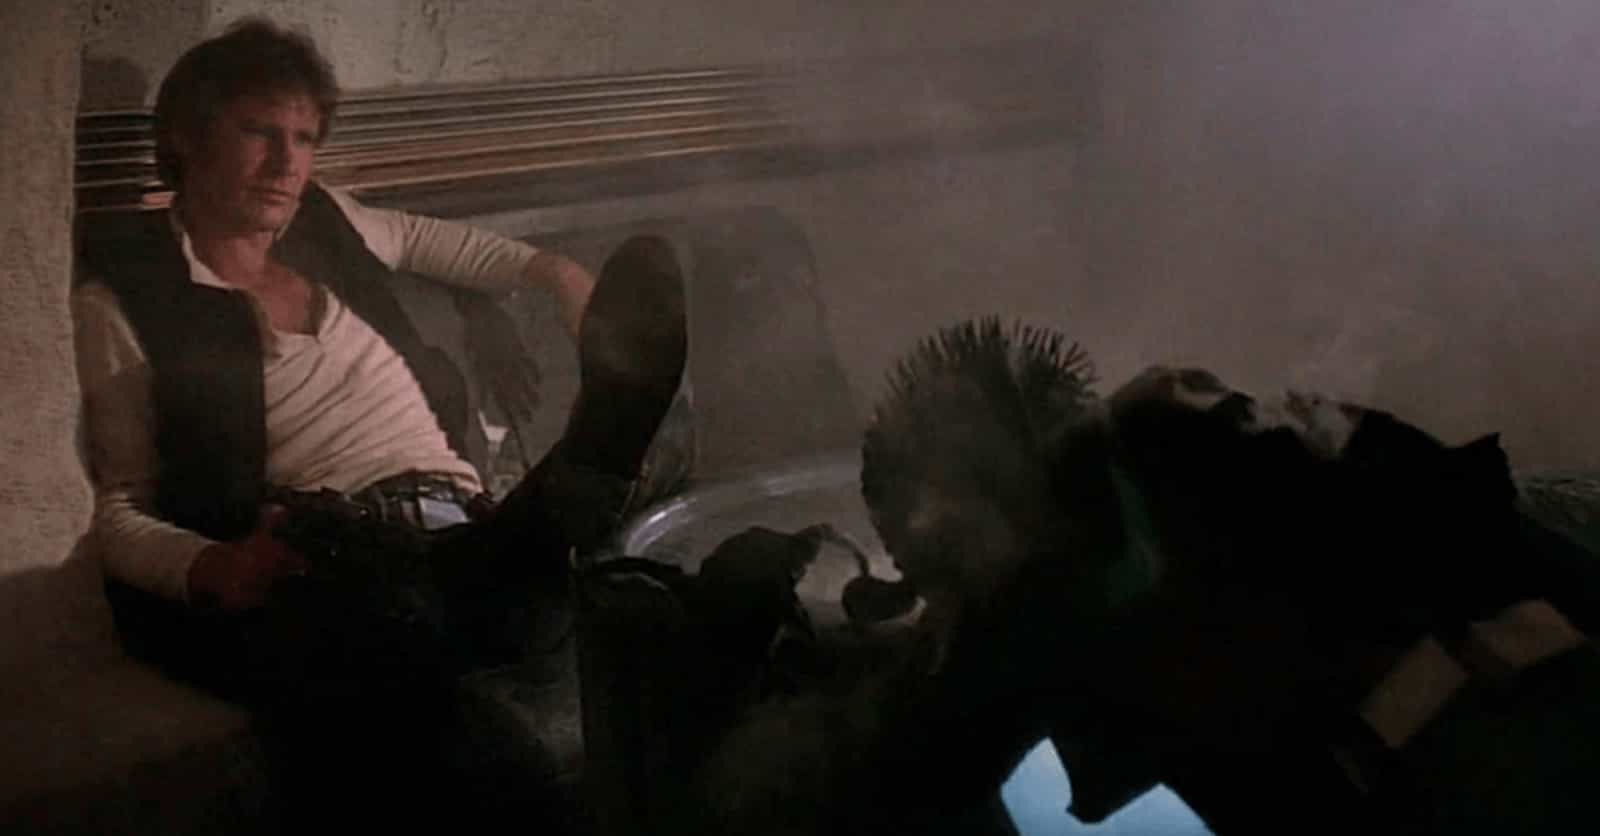 Han Shot First? A Timeline Of The Most Contentious Scene In 'Star Wars' History